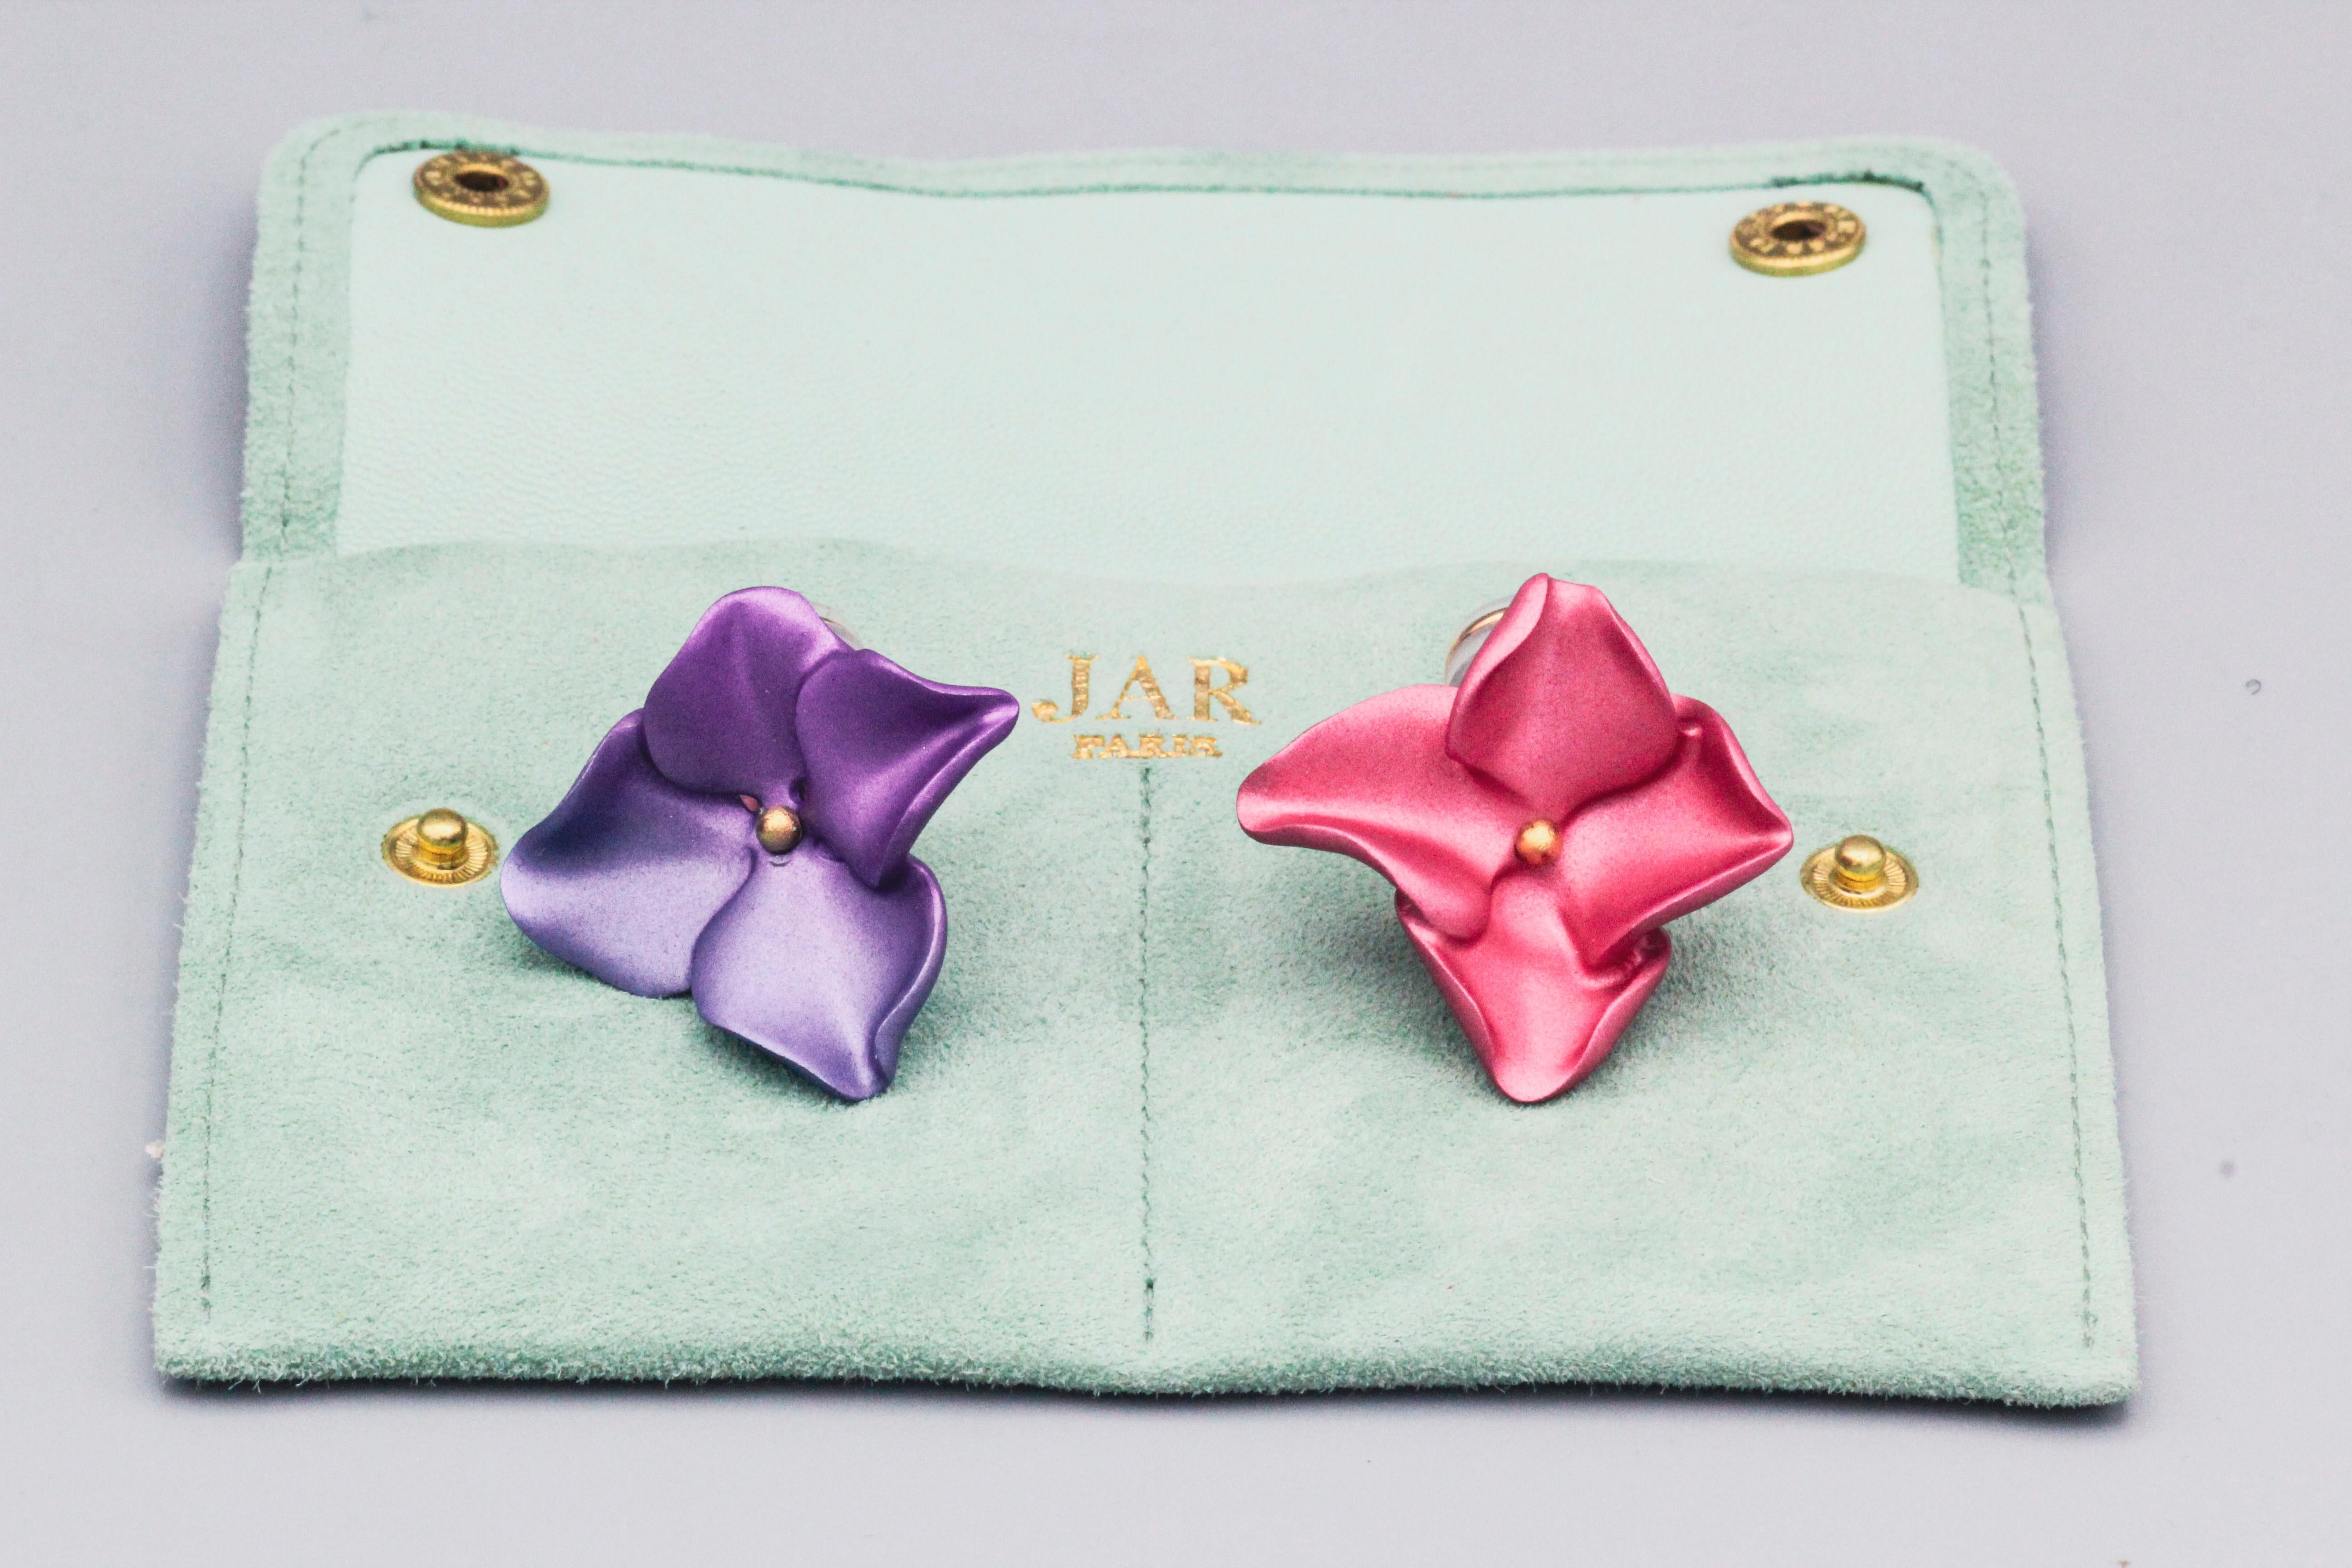 Delicate Delight: JAR Petite Aluminum and 18k Gold Pink Purple Hydrangea Earrings

Embrace the artistry of JAR with these enchanting petite hydrangea earrings. Crafted from lightweight aluminum, the blooms boast a delightful blend of pink and purple